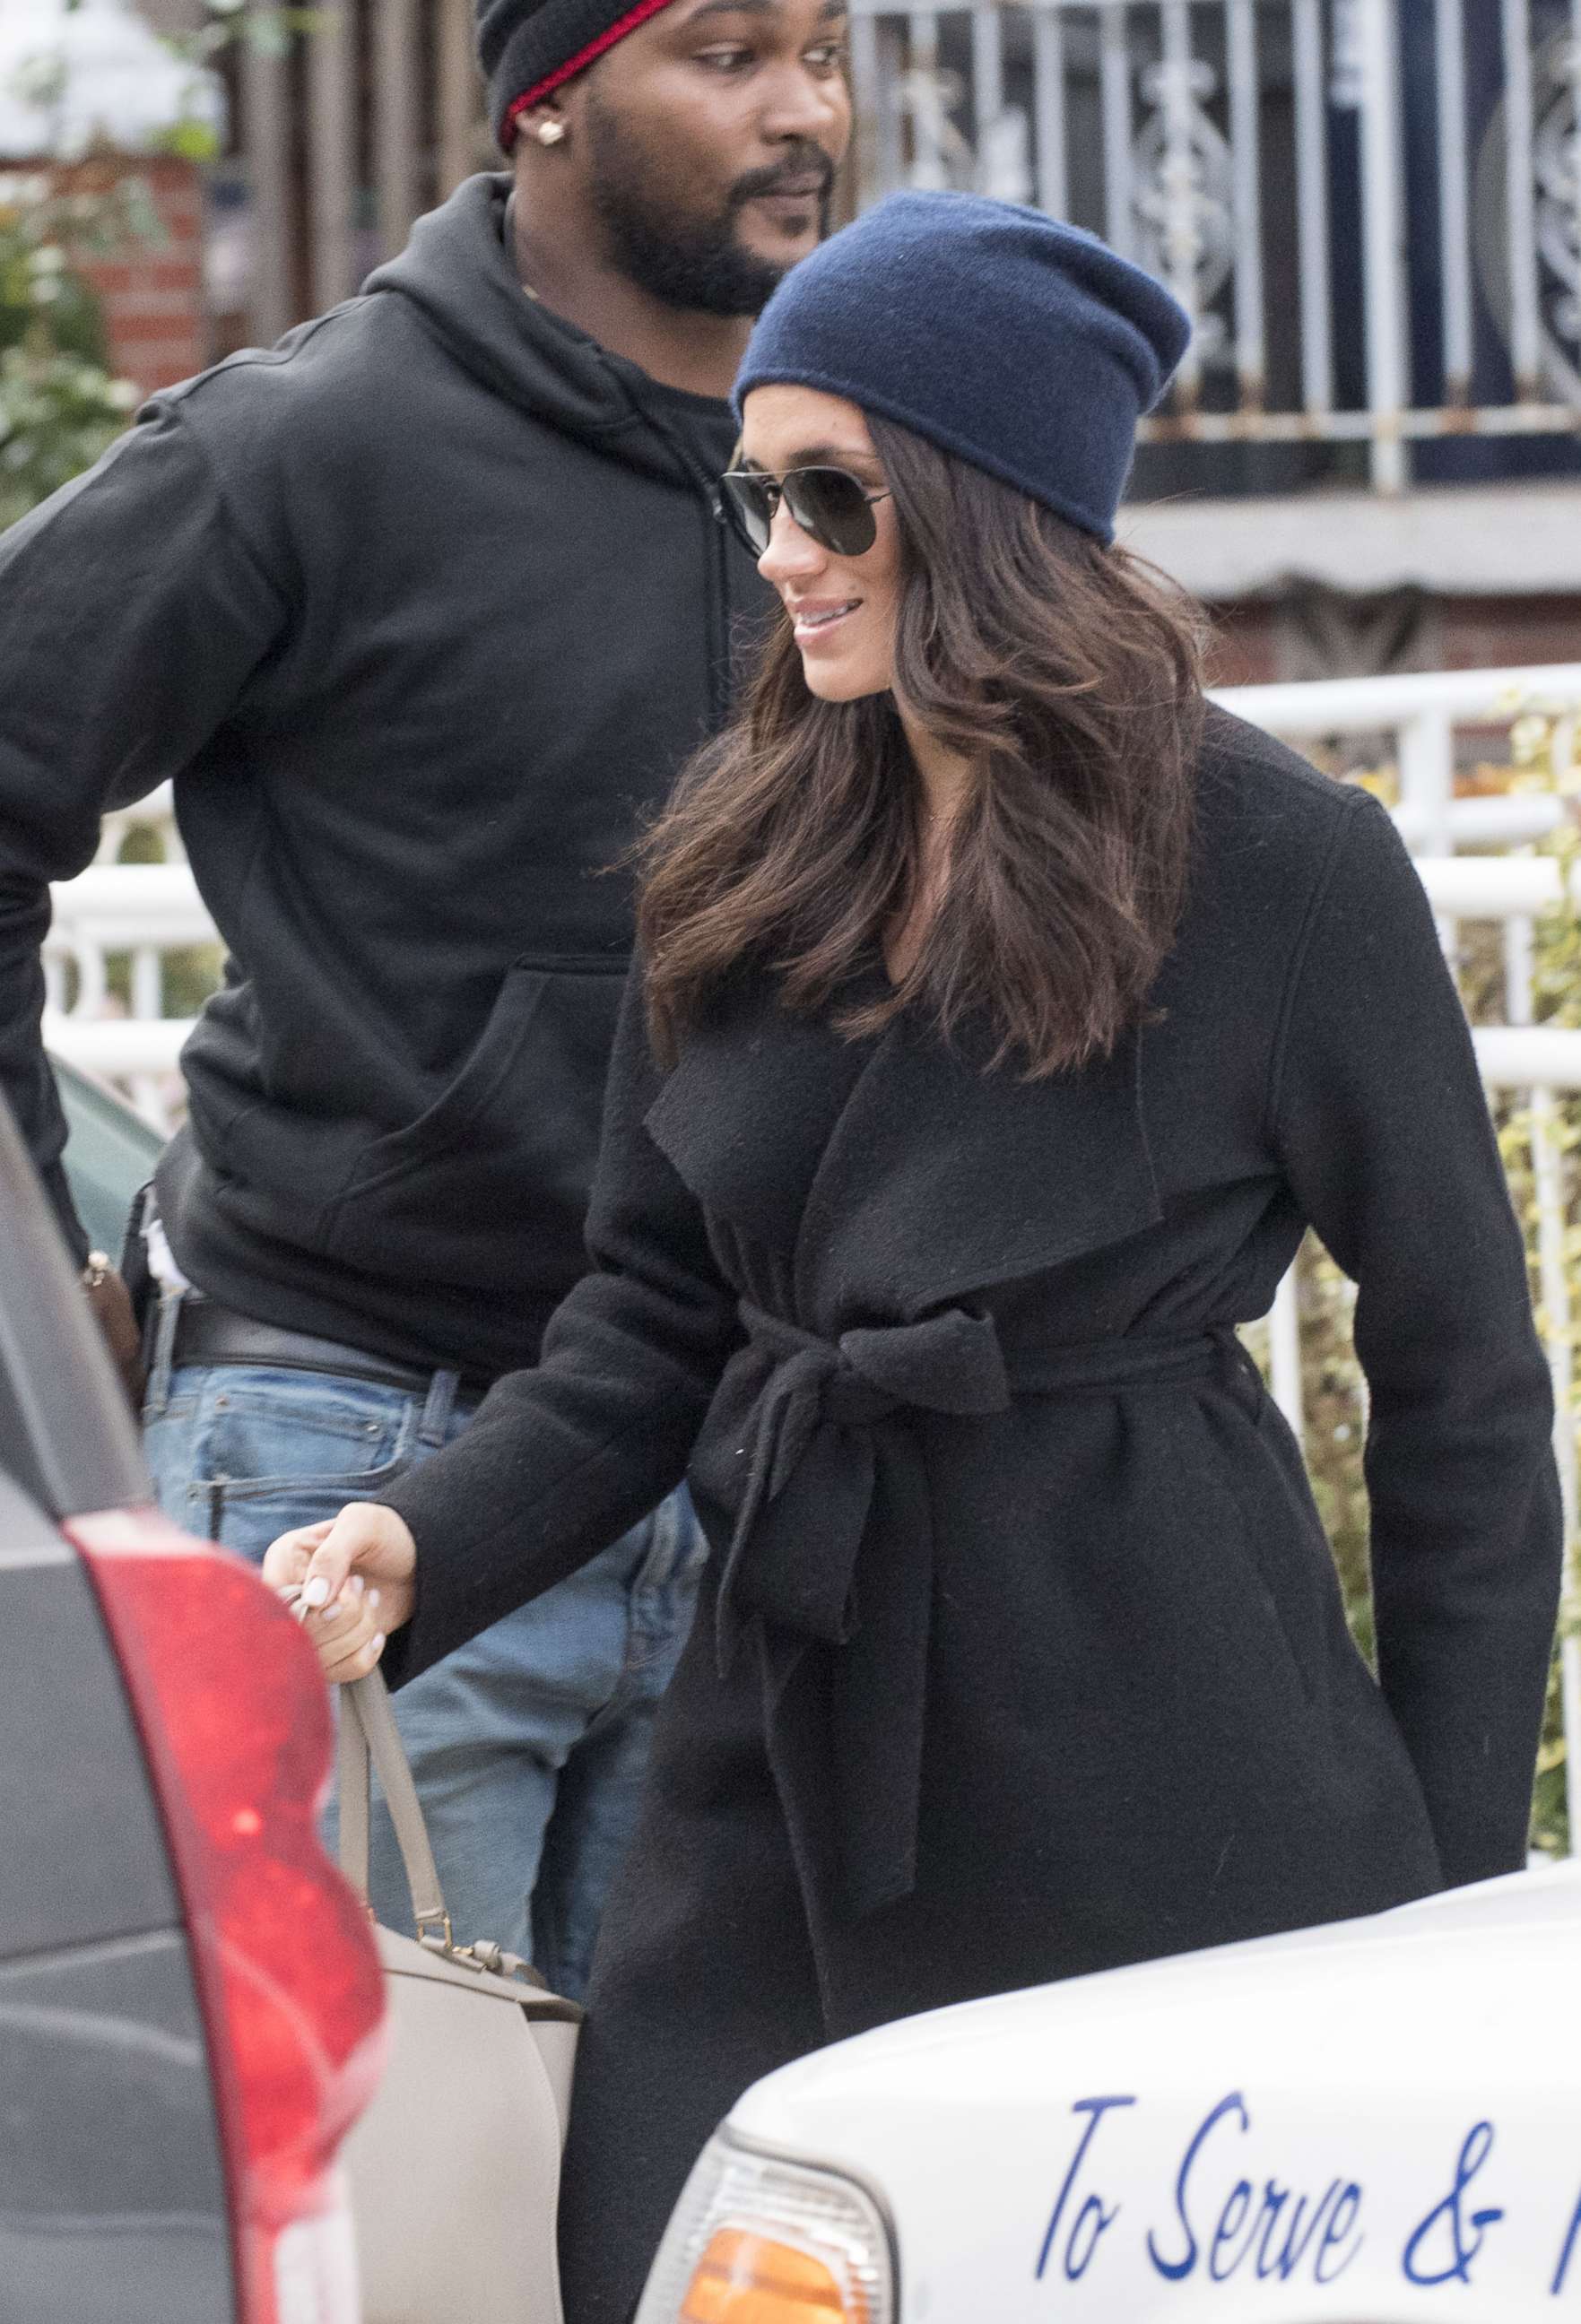 PHOTO: Meghan Markle as she left her Toronto home to go to the Suits film set, Nov. 3, 2016.